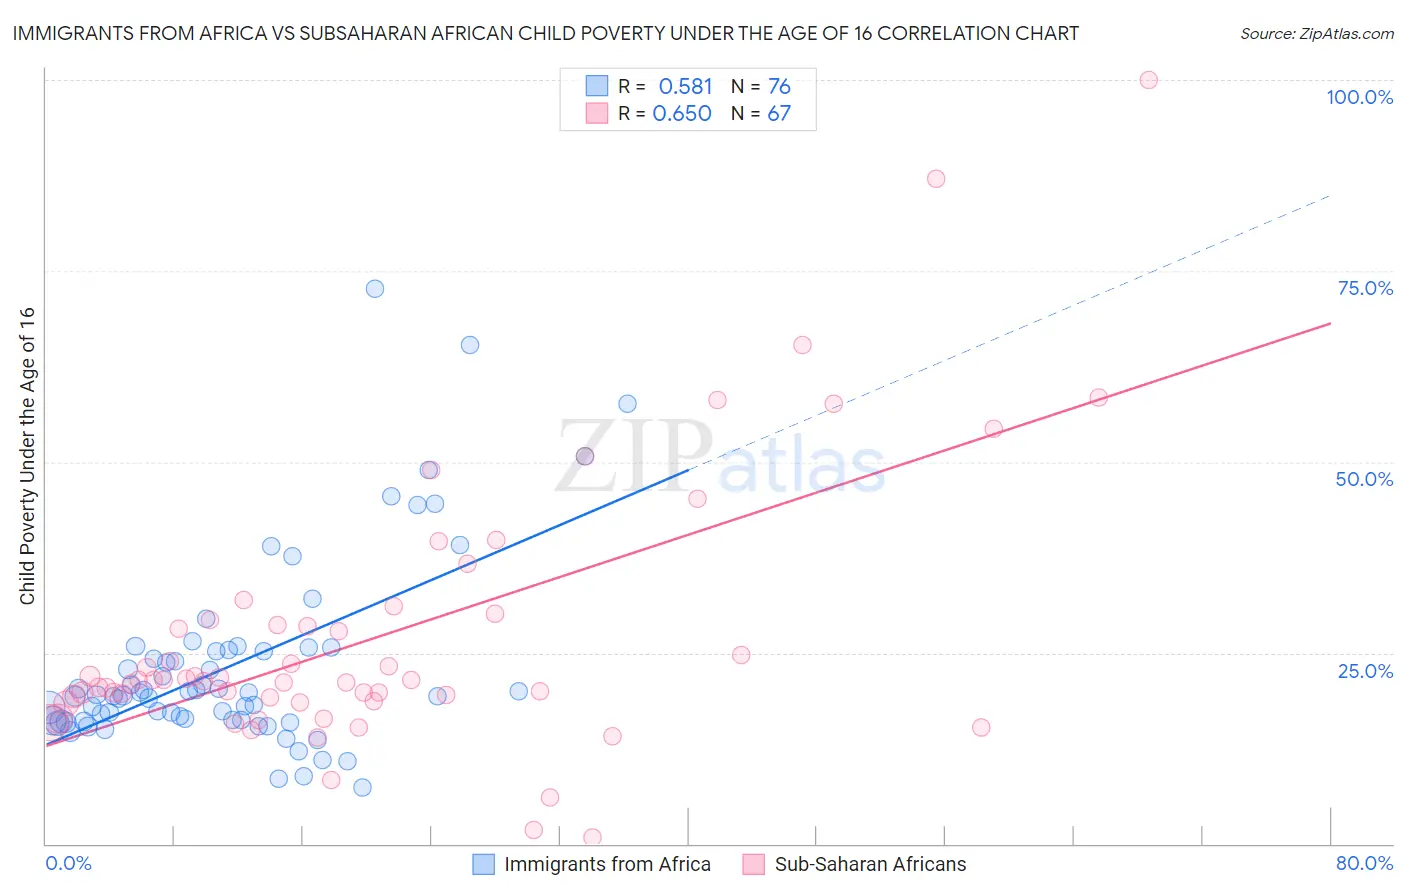 Immigrants from Africa vs Subsaharan African Child Poverty Under the Age of 16